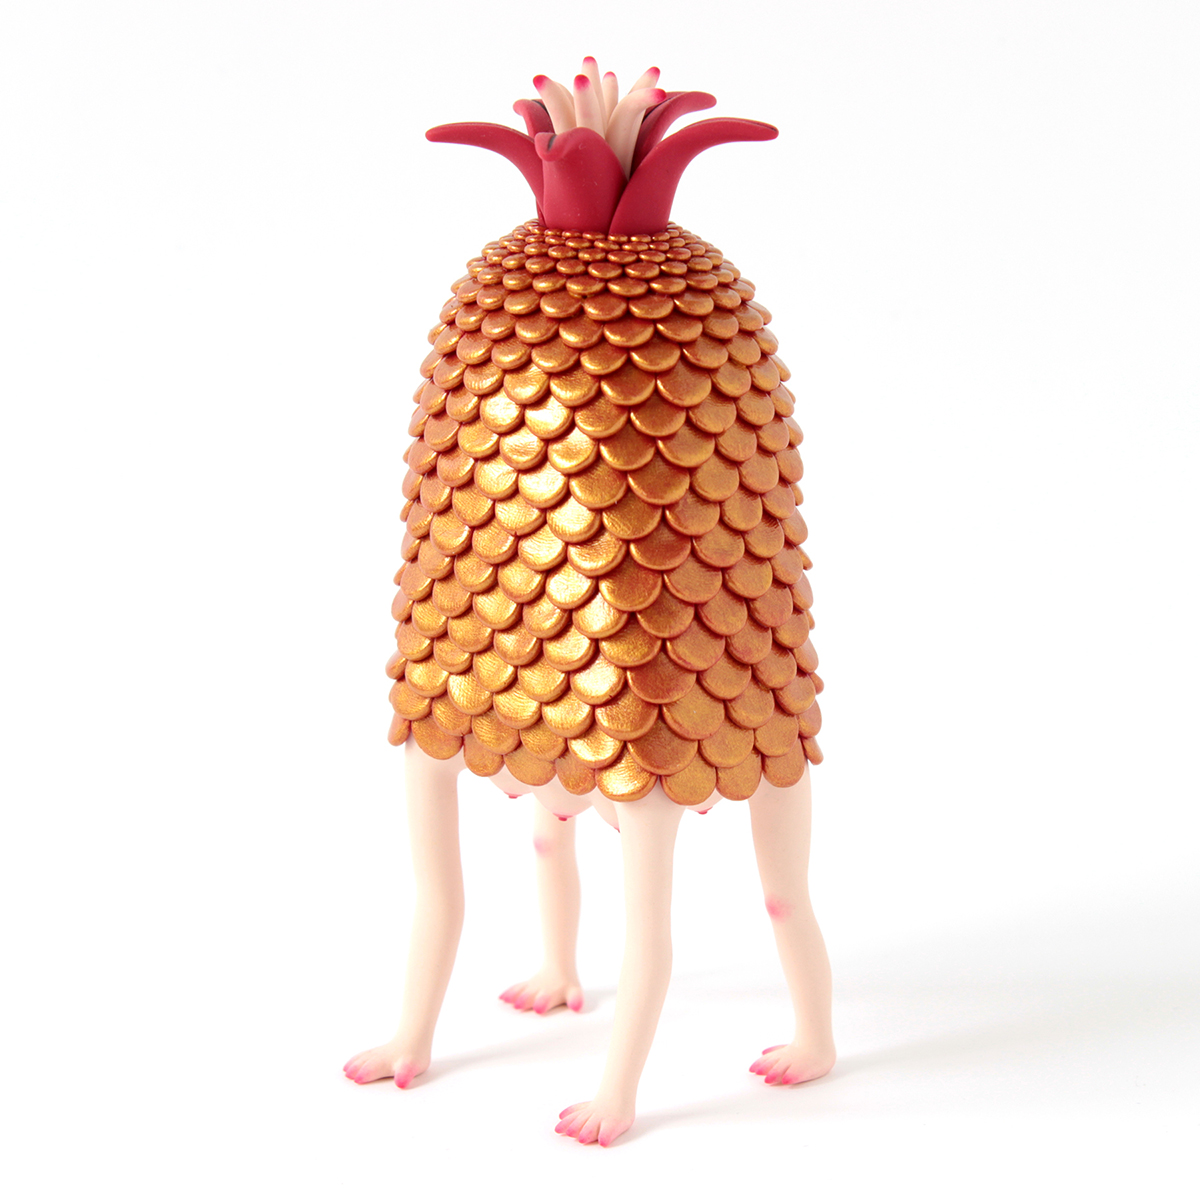 Polymer clay sculpture of a strange creature with human legs, tits, scales, and a flower on topegs